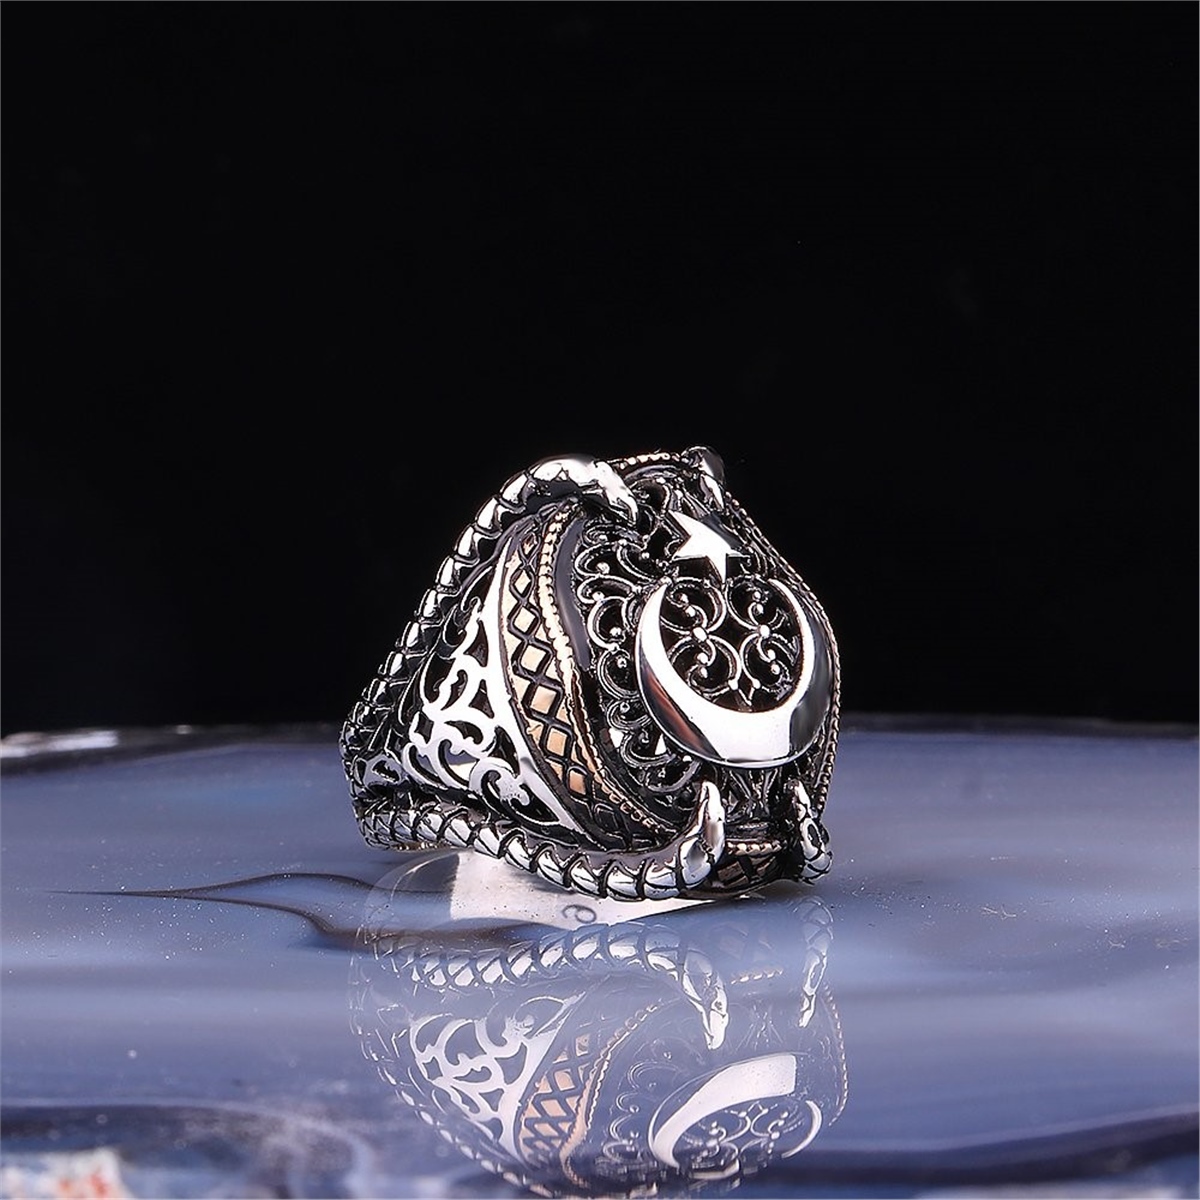 Clawed Crescent and Star Patterned 925 Sterling Silver Men's Ring